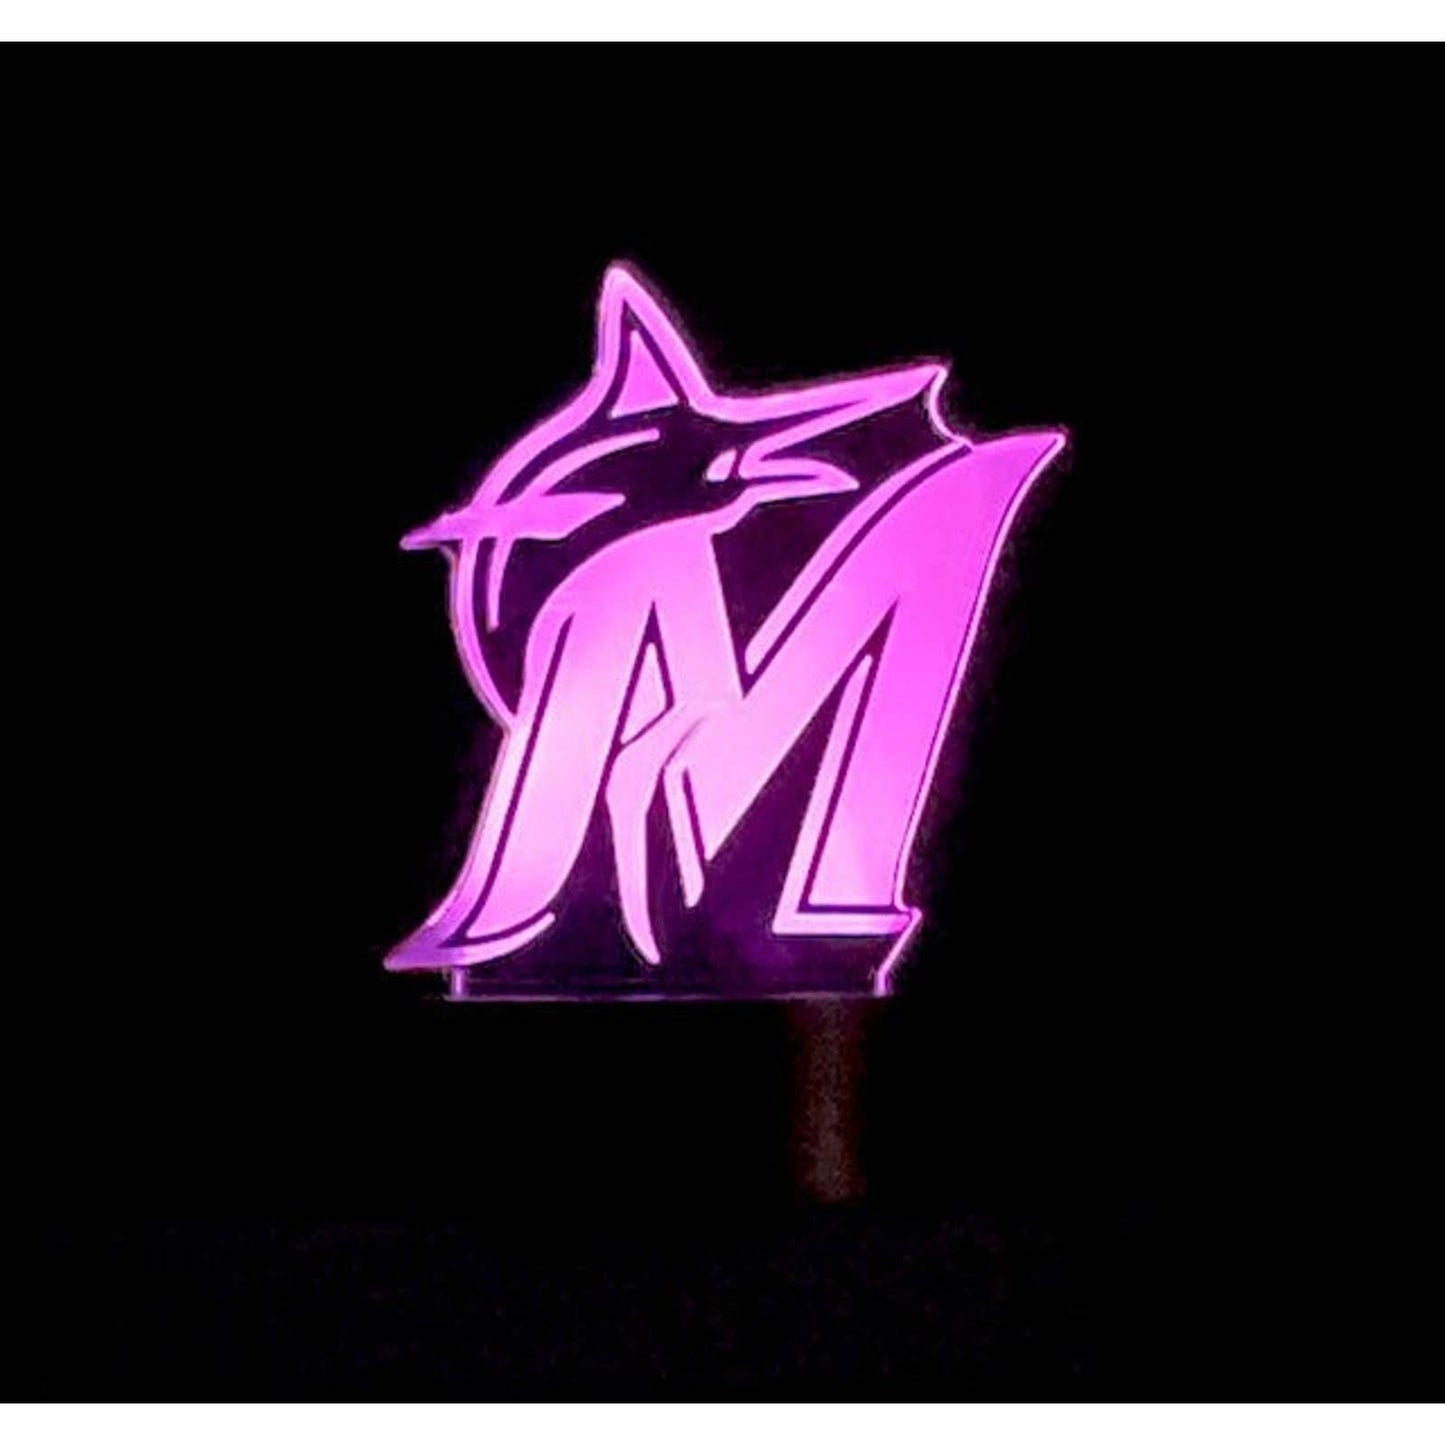 Miami Marlins 3D LED Night-Light 7 Color Changing Lamp w/ Touch Switch